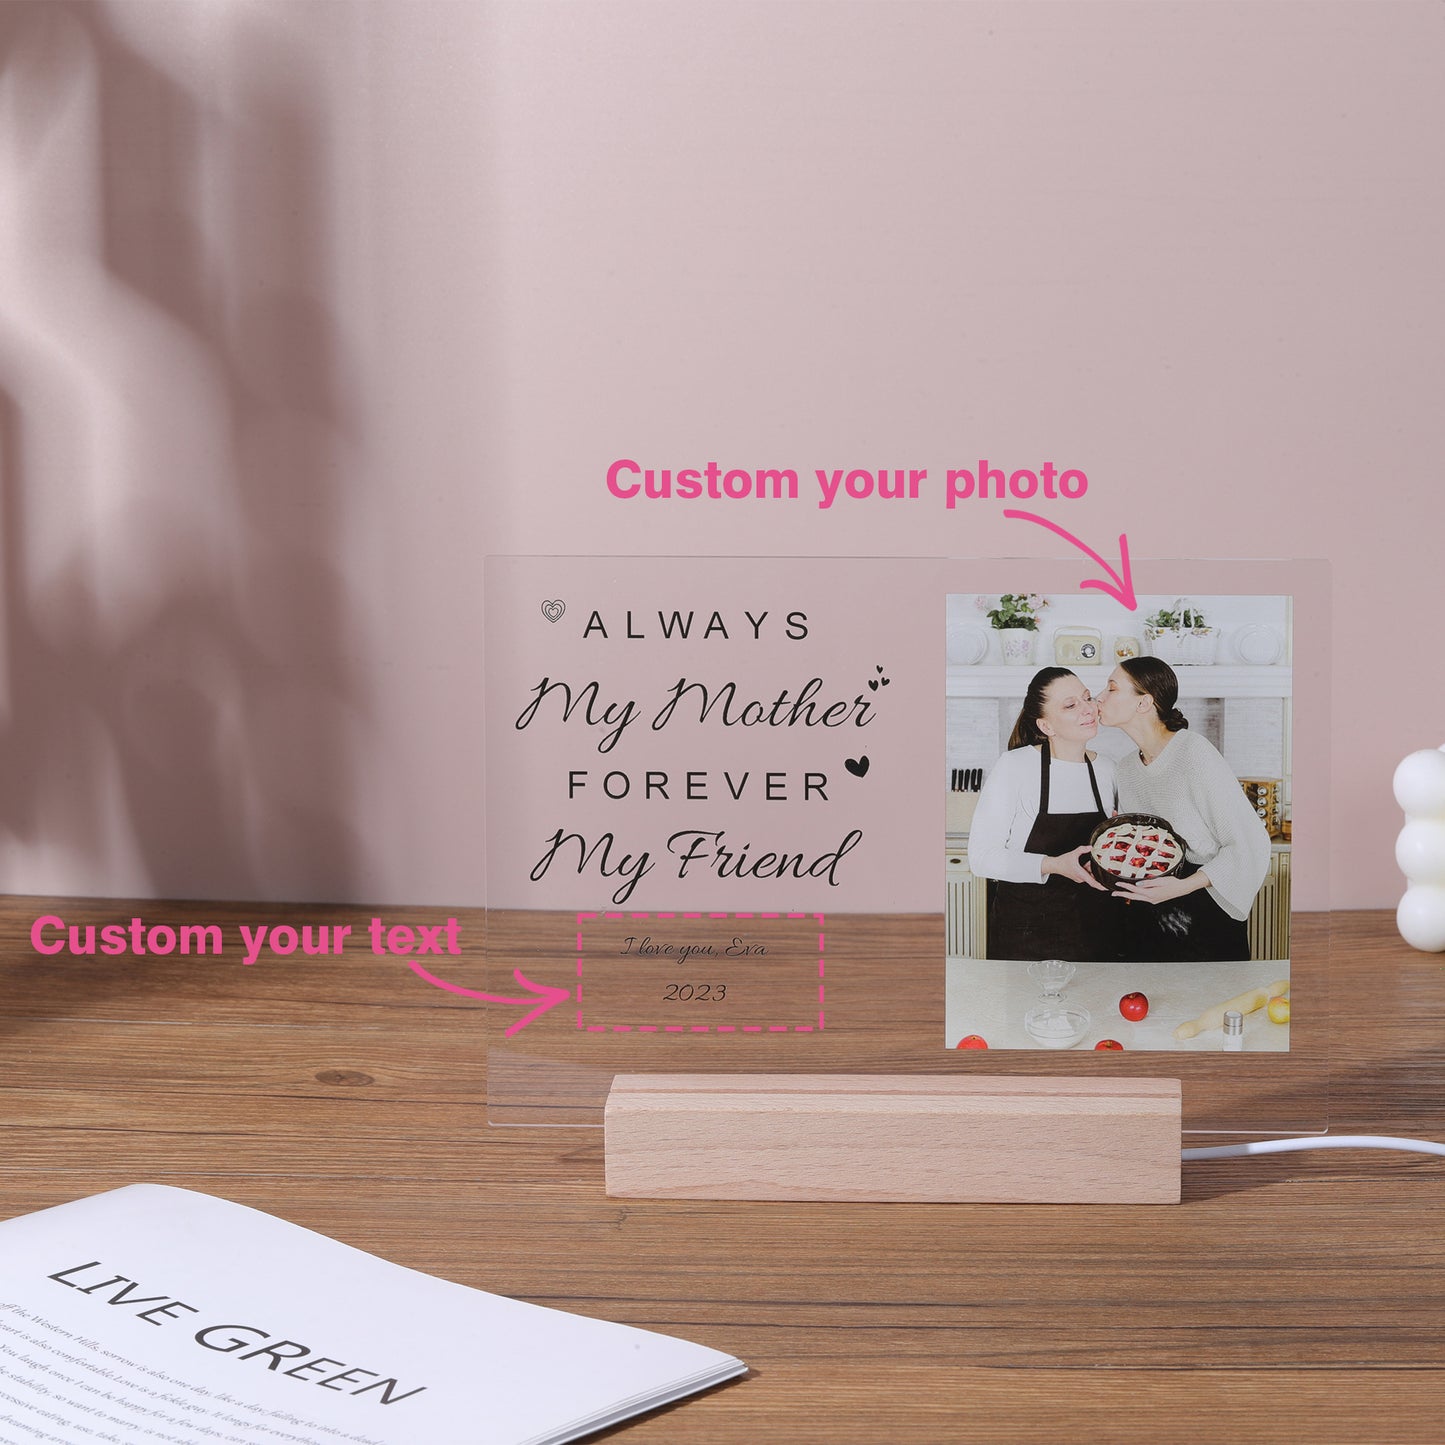 Always my mother, Forever my friend, Mother's day Frame, Custom